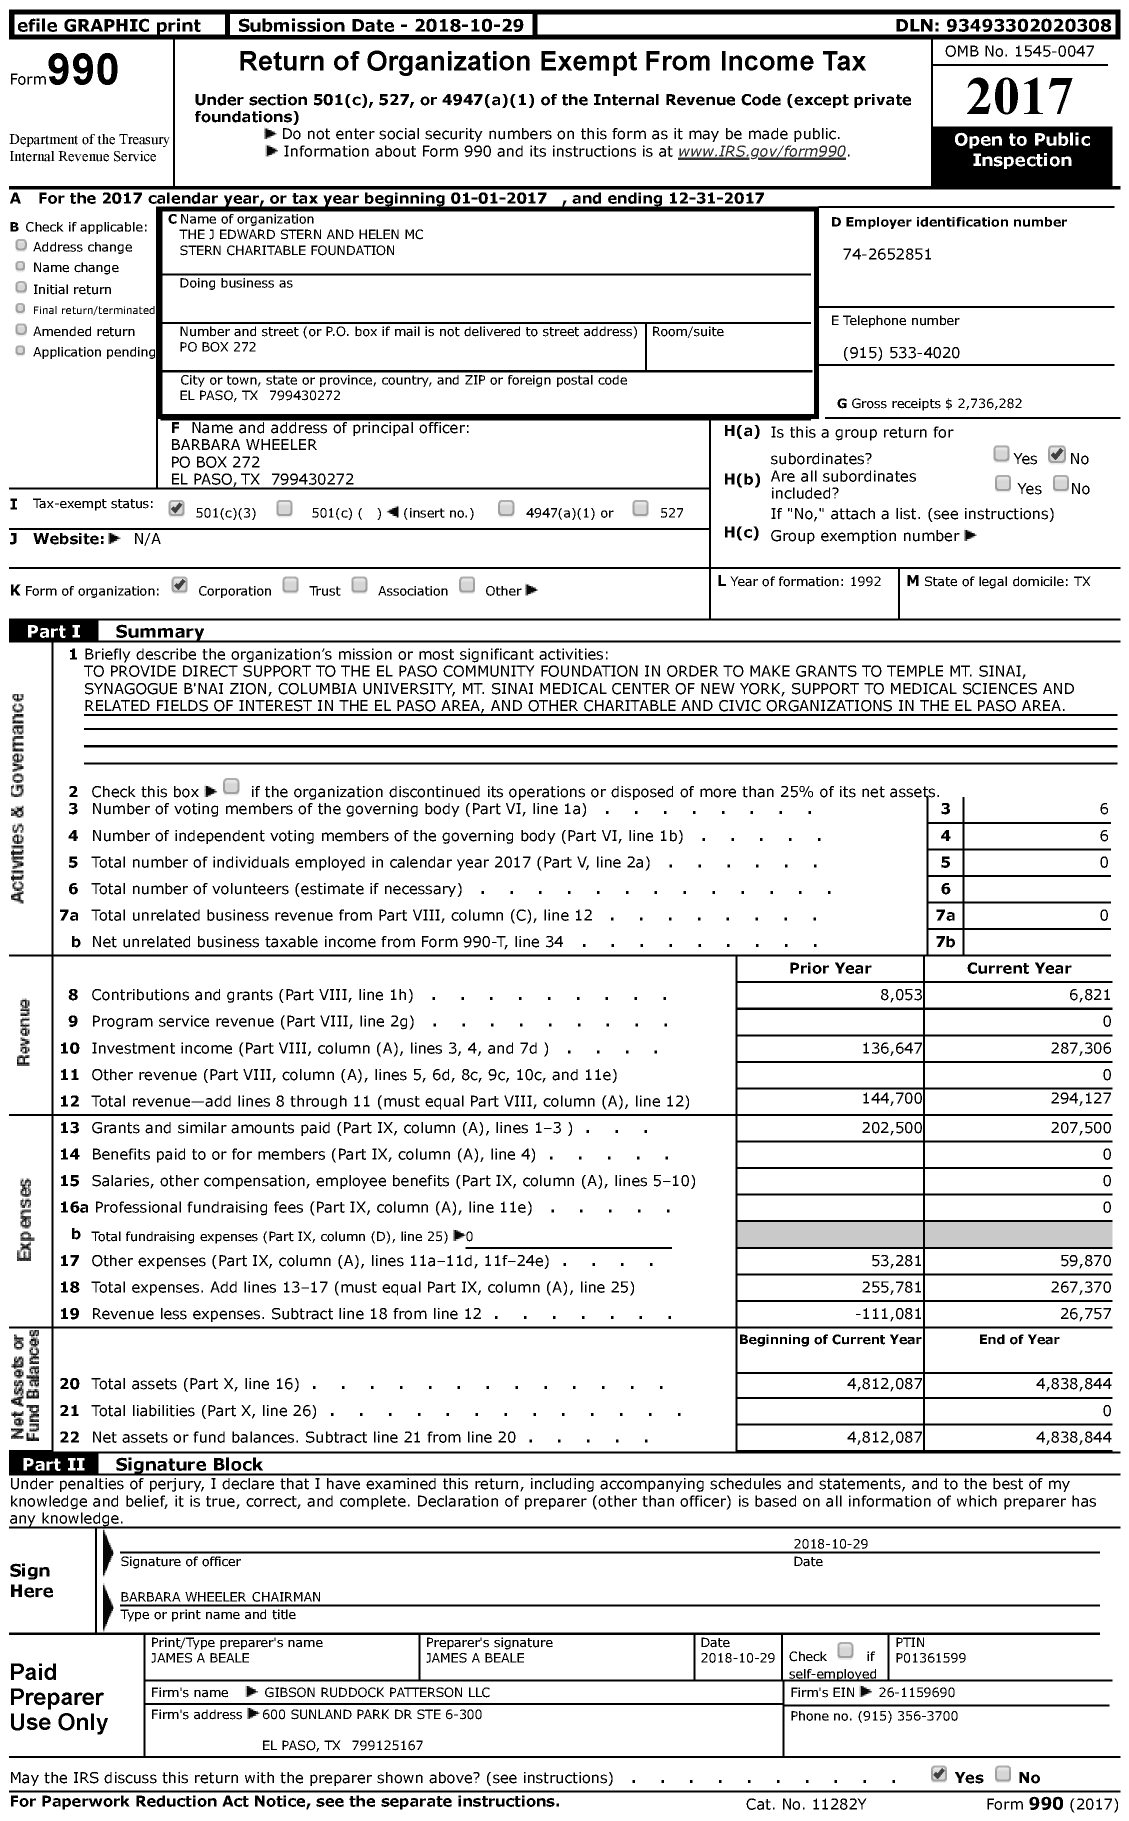 Image of first page of 2017 Form 990 for The J Edward Stern and Helen MC Stern Charitable Foundation